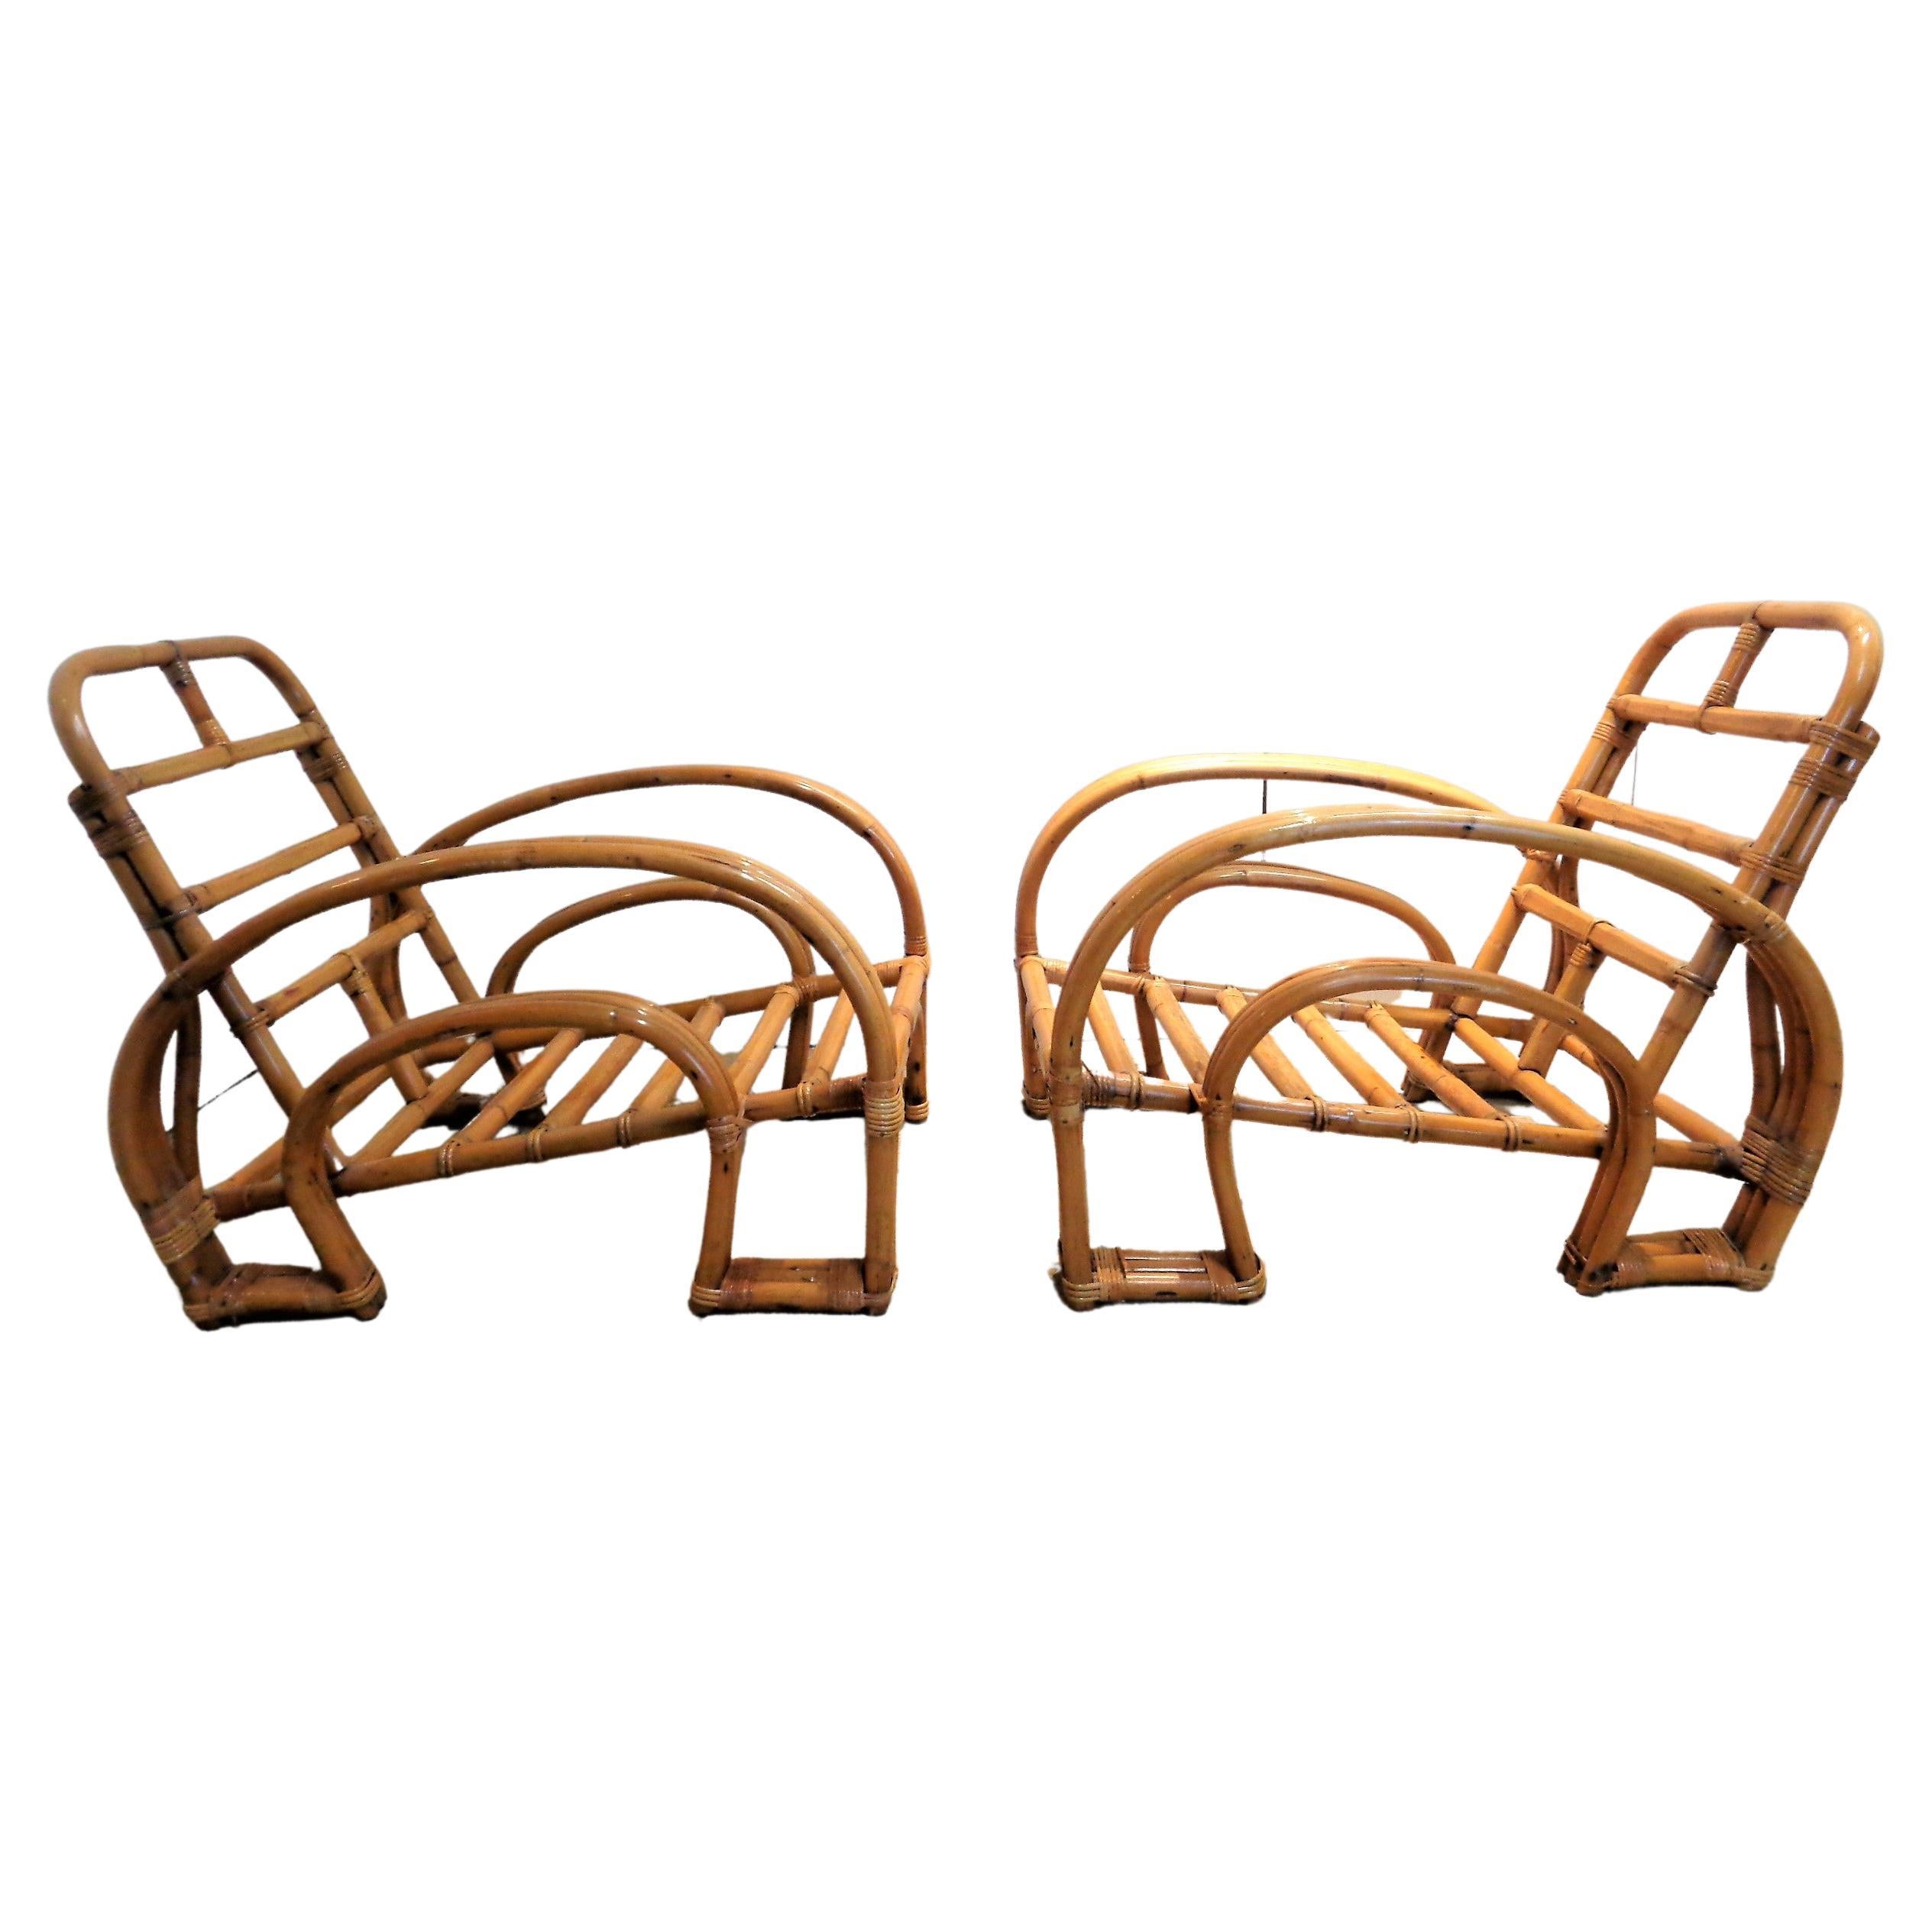 Exceptional pair of Art Deco three strand rattan and cane double horseshoe lounge chairs in beautifully aged original glowing surface color. Attributed to Paul Frankl, circa 1940-1950. Chairs measure 30